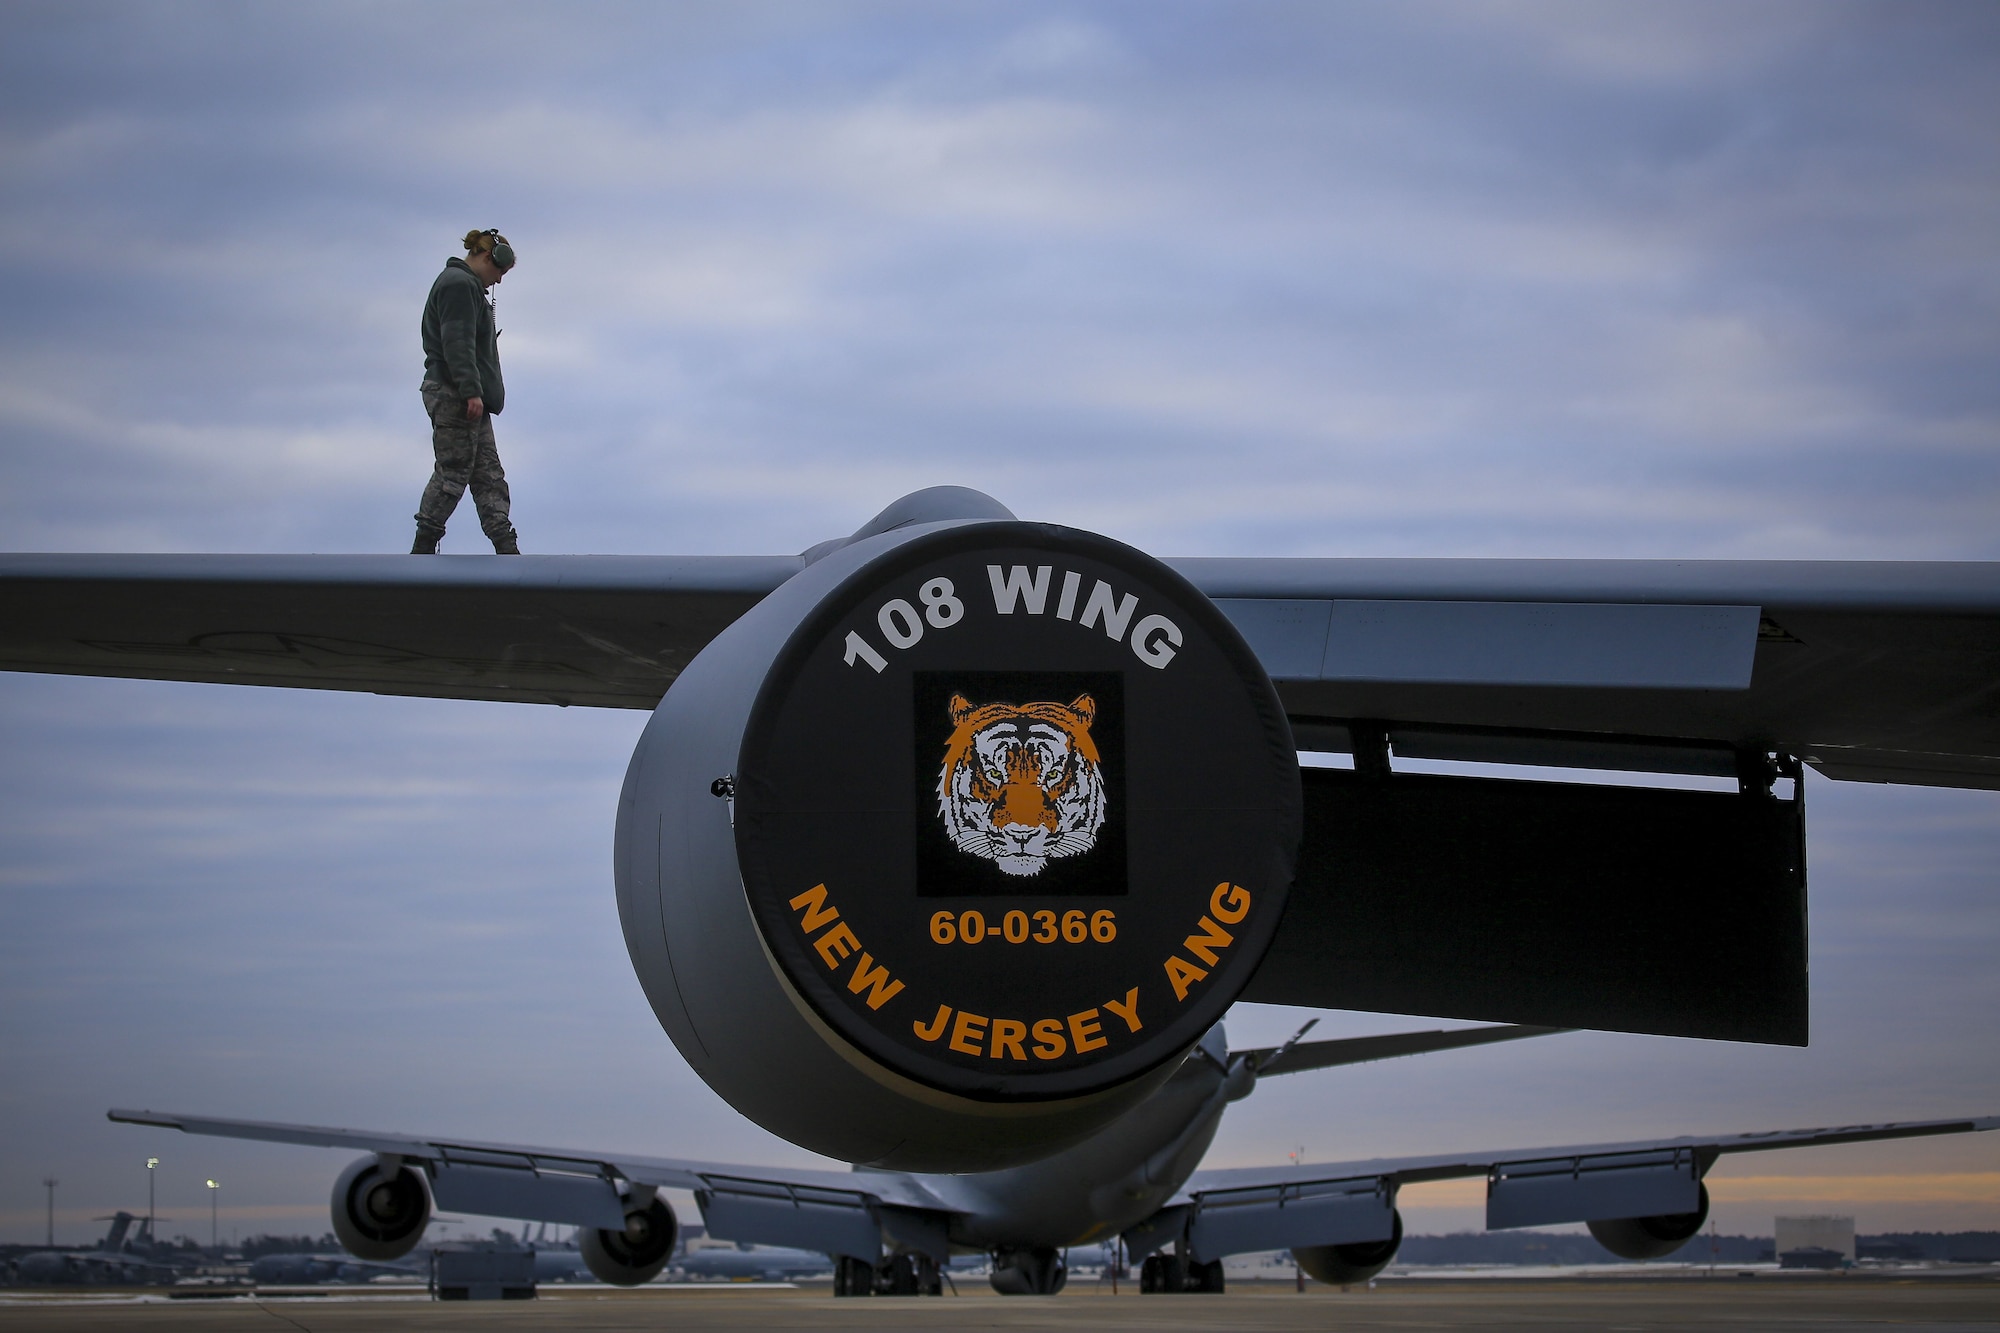 A New Jersey Air National Guard KC-135R Stratotanker crew chief from the 108th Wing checks the wings for imperfections before a flight on Joint Base McGuire-Dix-Lakehurst, N.J., Jan. 11, 2018. (U.S. Air National Guard photo by Master Sgt. Matt Hecht)